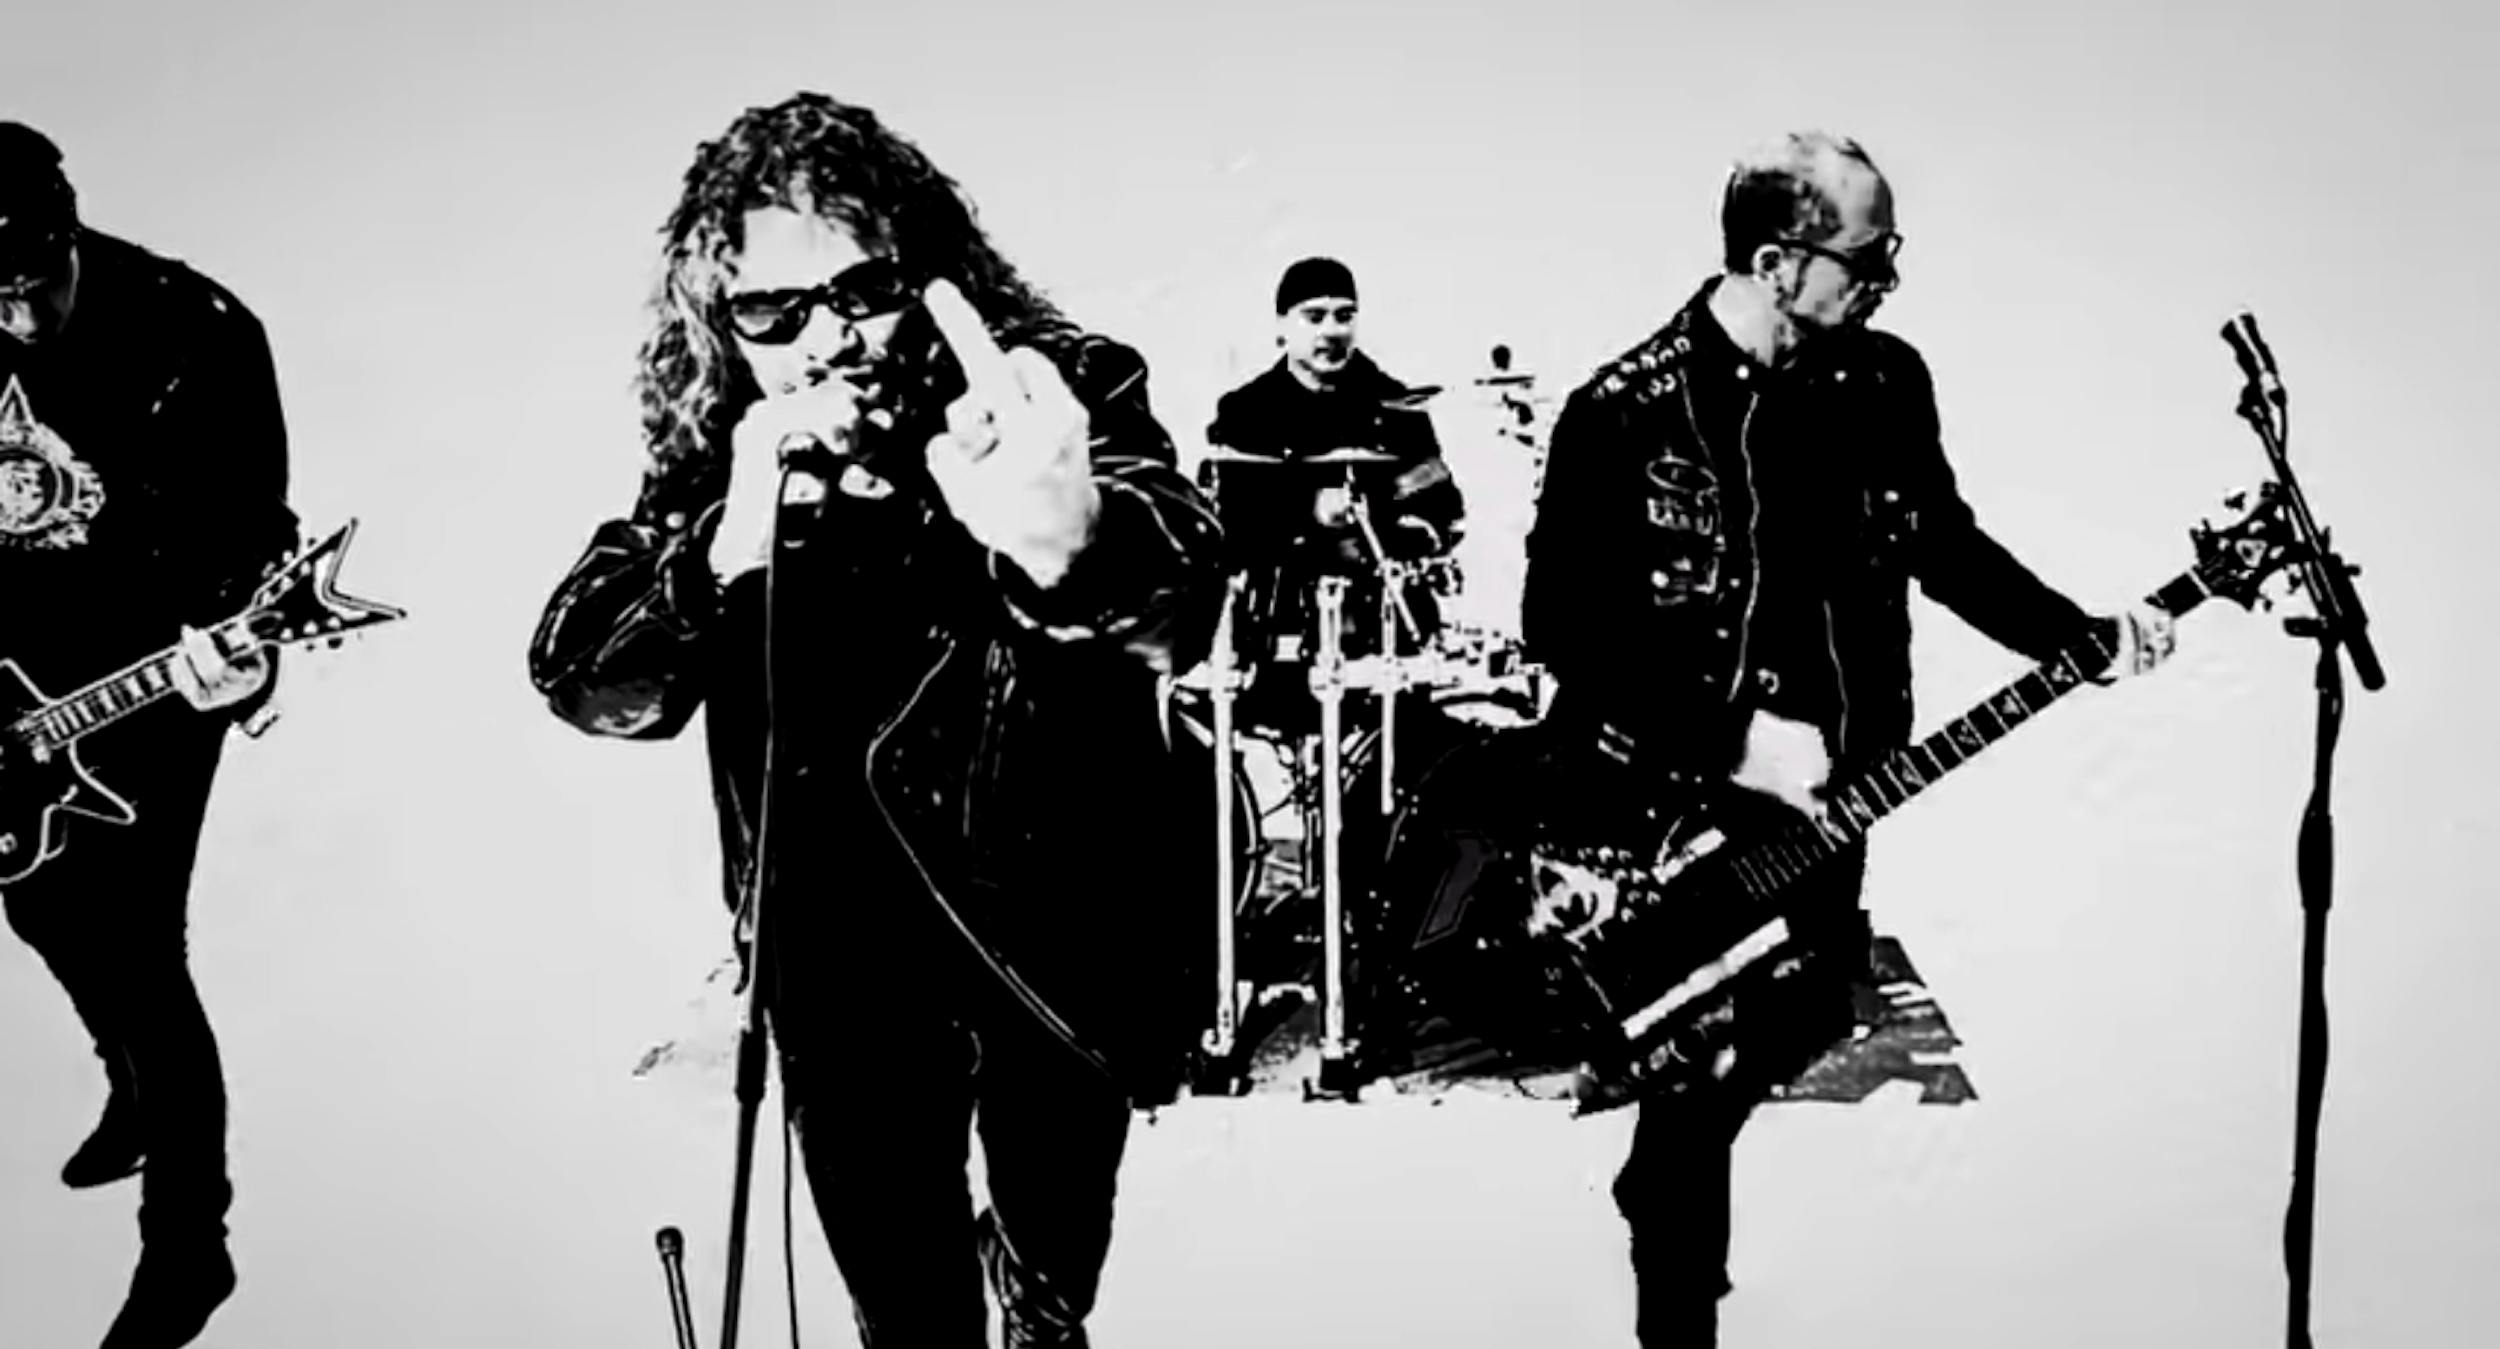 Overkill Rep The Dirty Jerz In New Video, Welcome To The Garden State